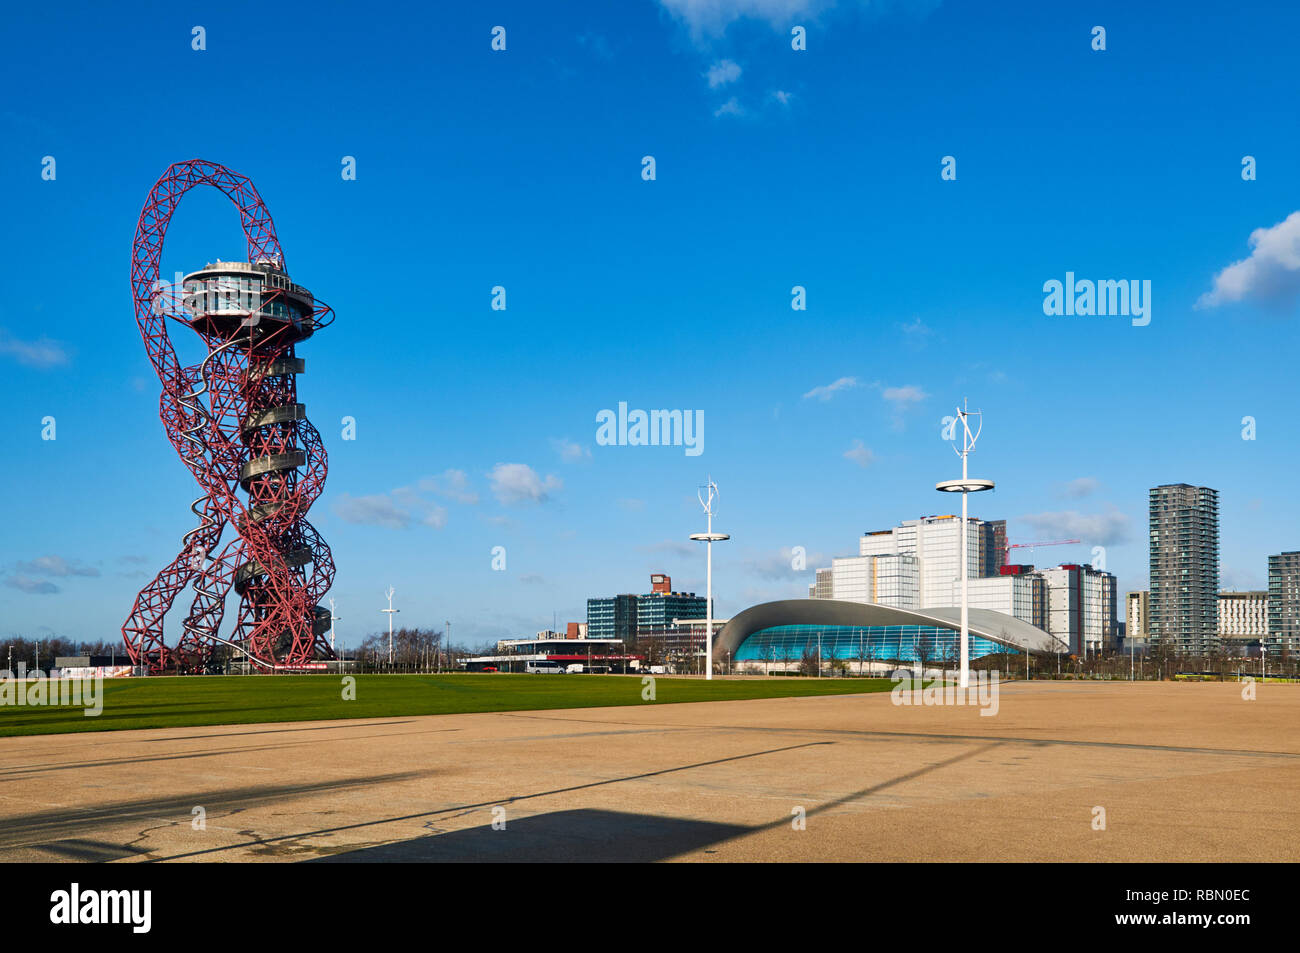 Queen Elizabeth Olympic Park at Stratford, East London UK, with the Arcelormittal Orbit Stock Photo